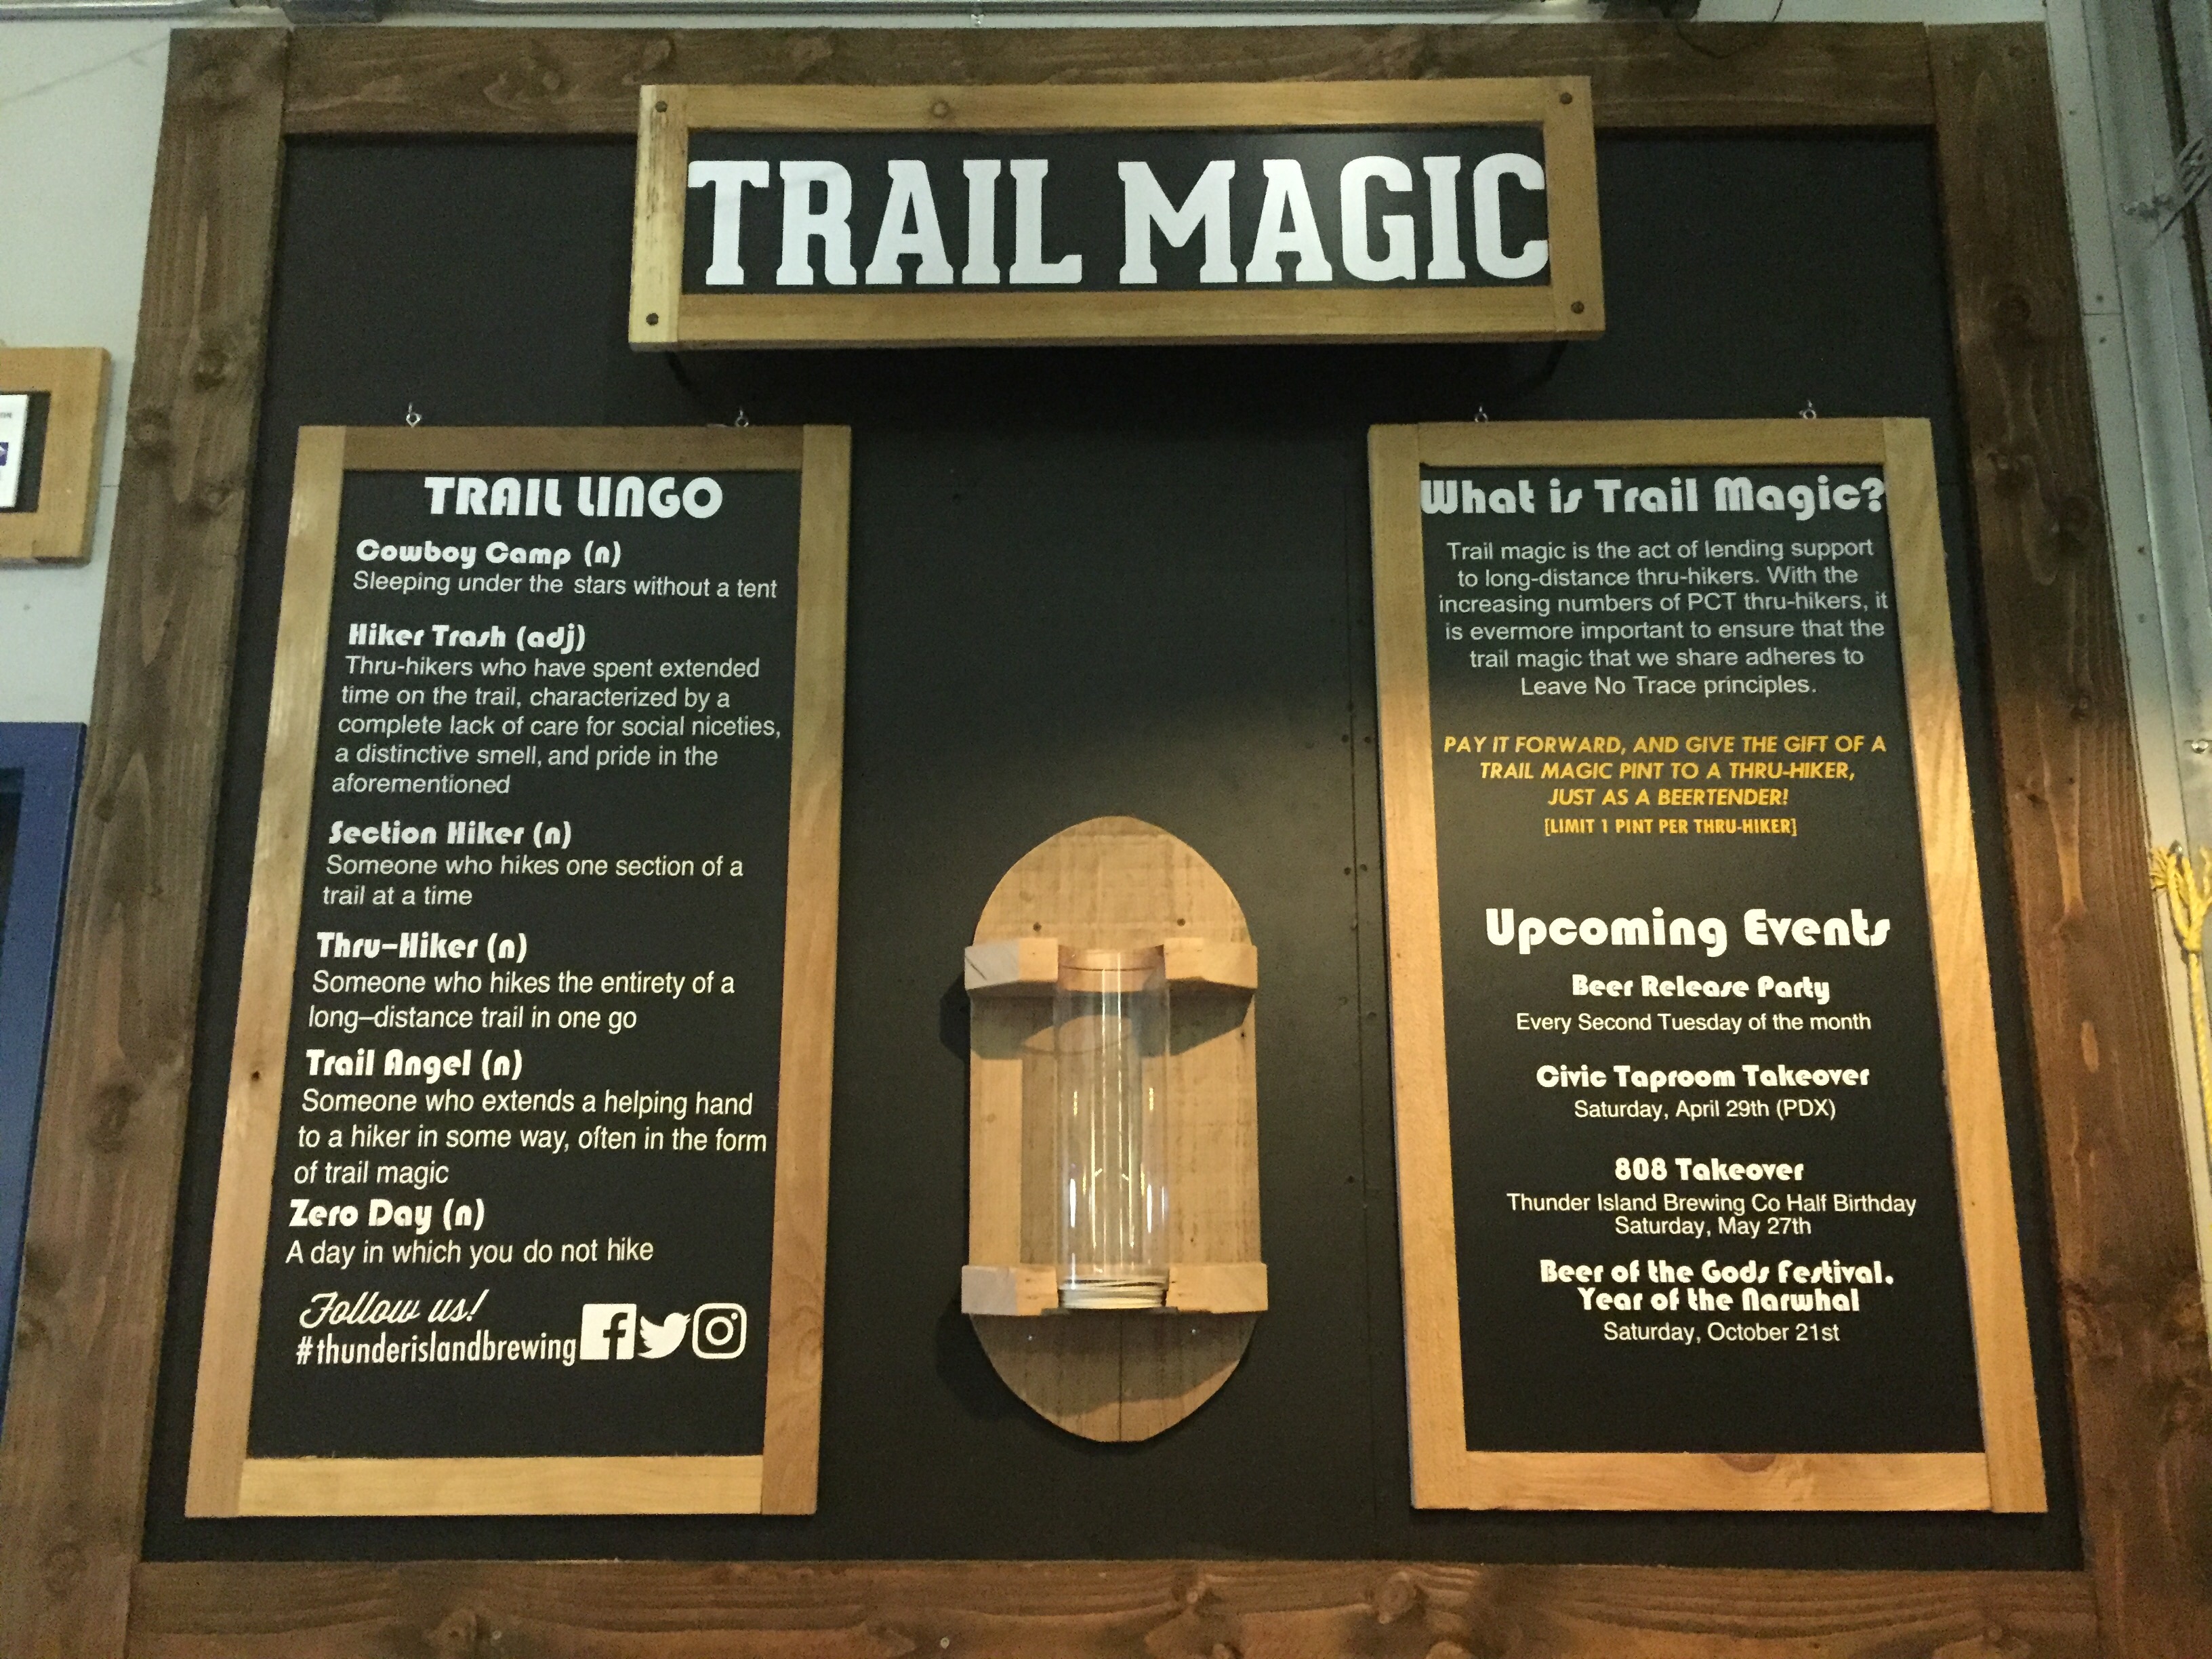 The Trail Magic Board at Thunder Island Brewing Company with trail lingo and instructions on how to participate